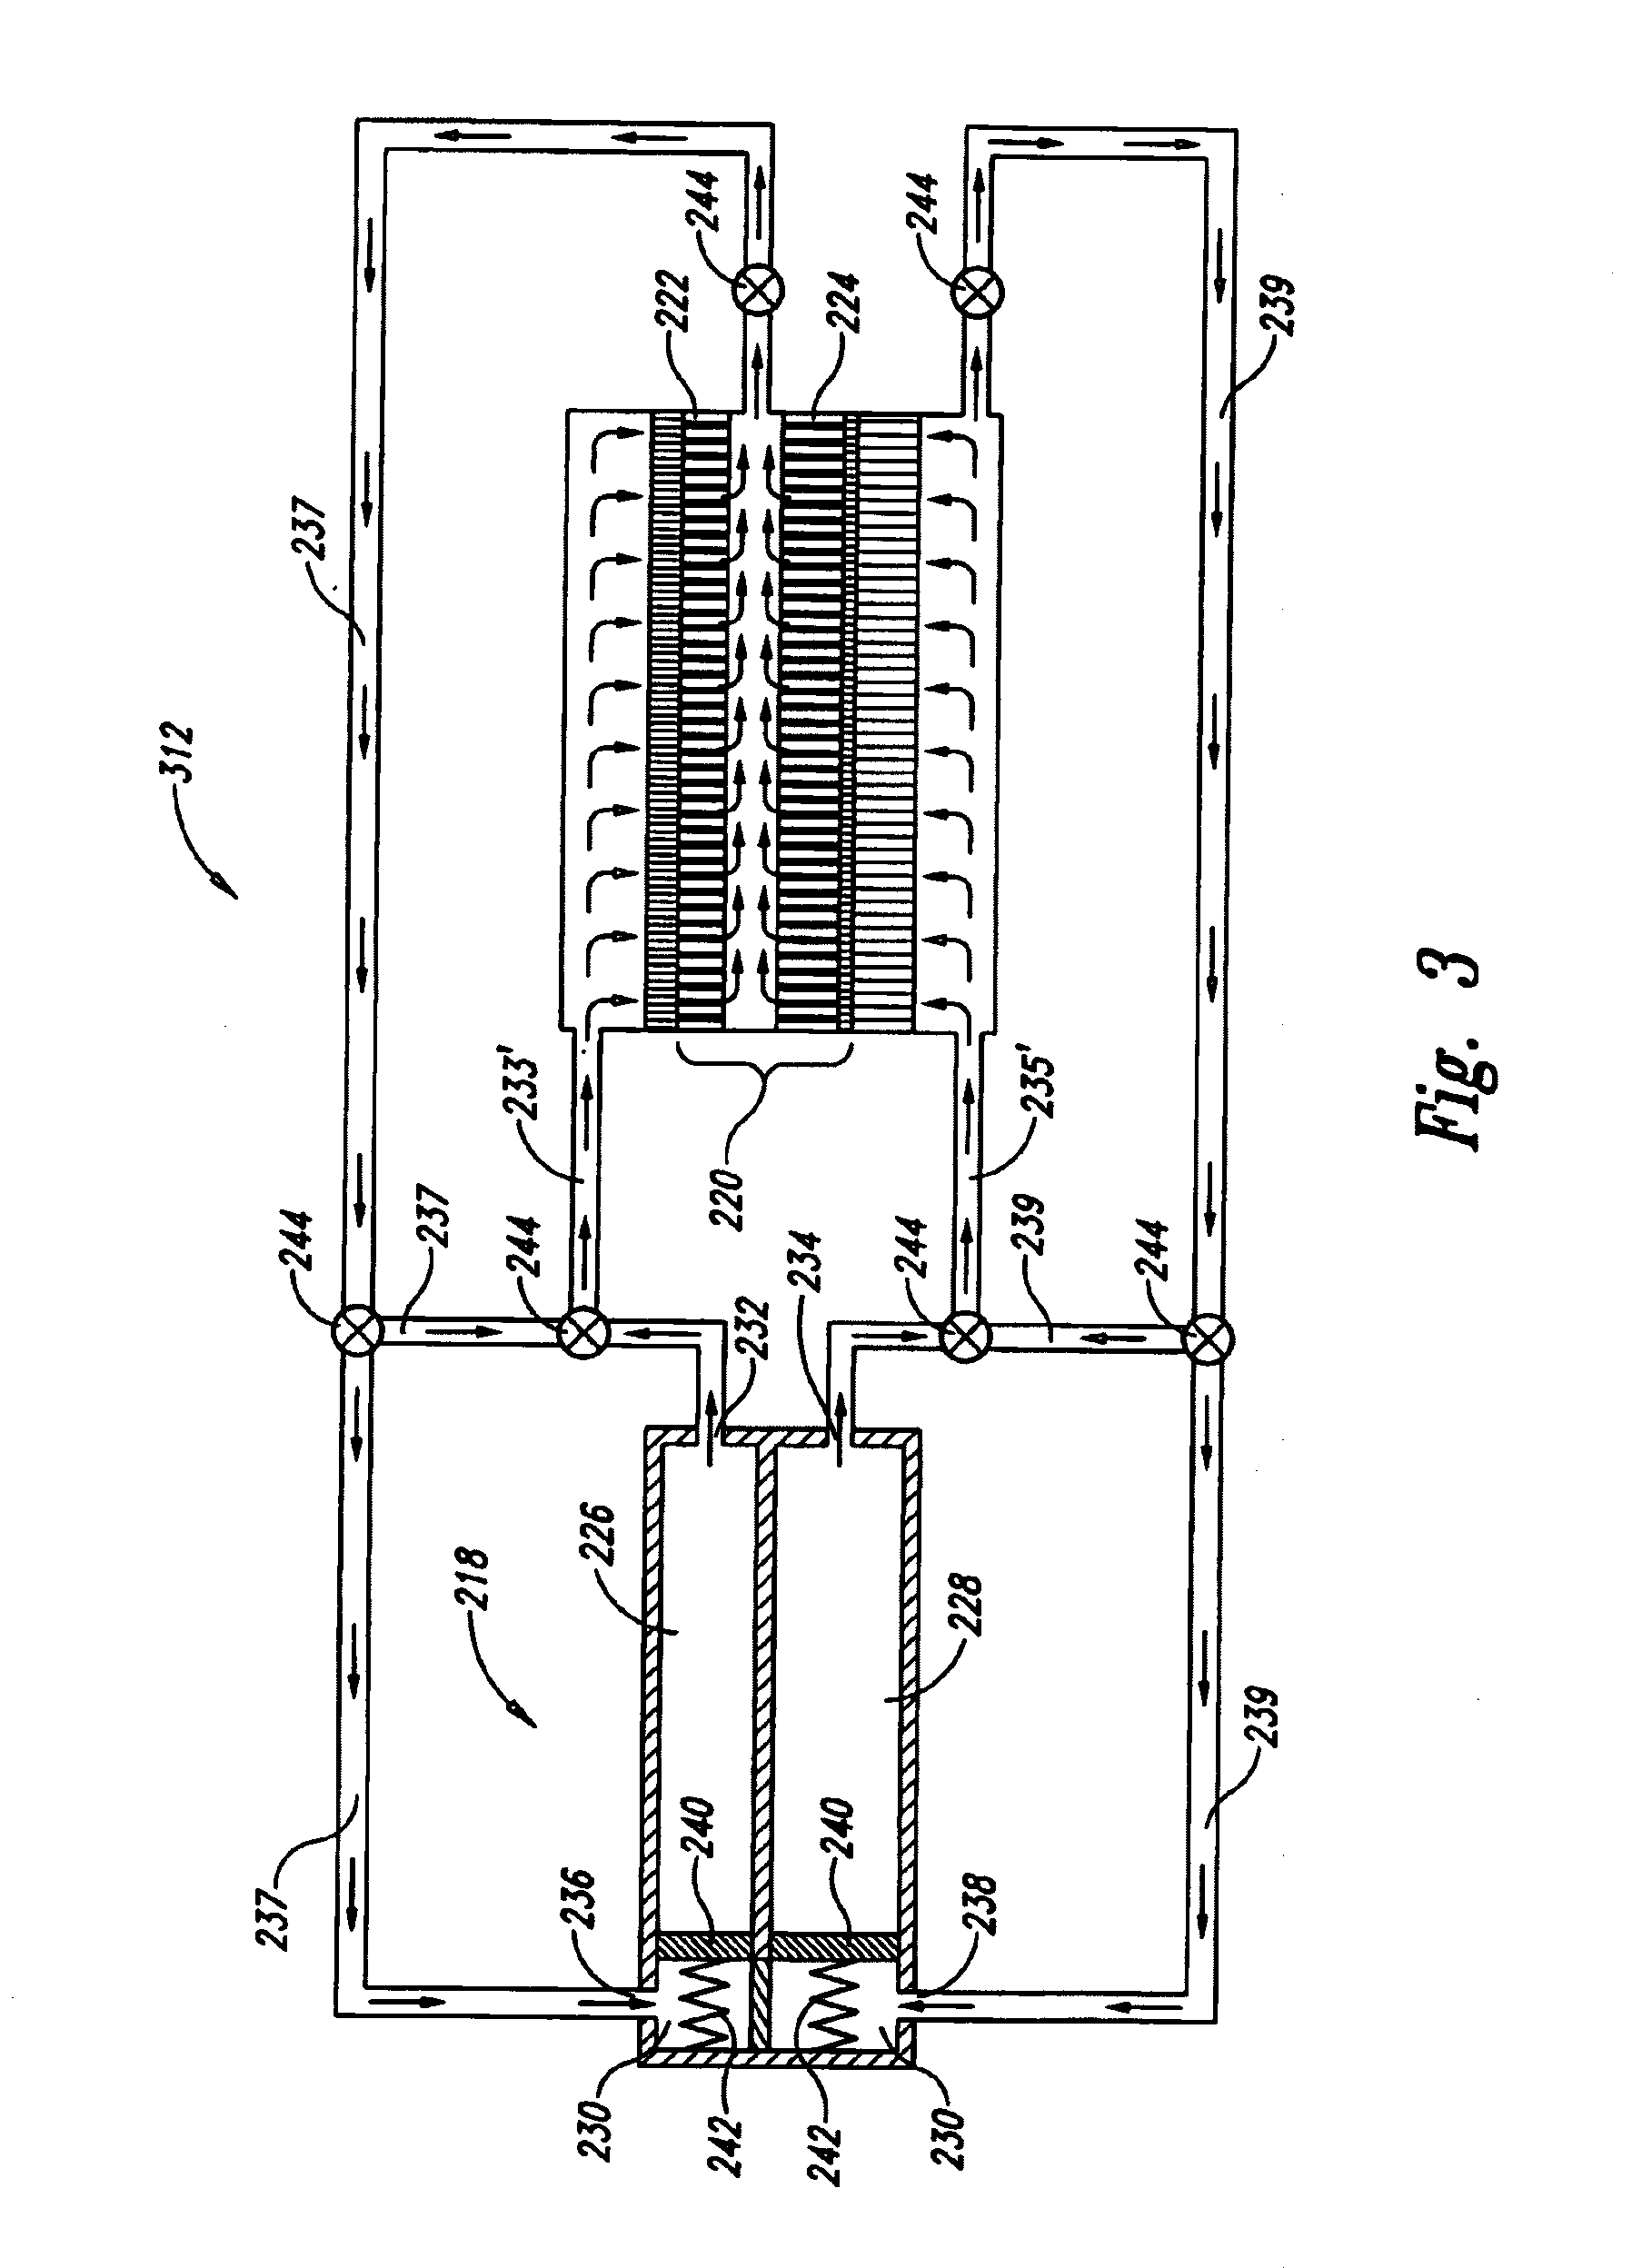 Fluid cell system reactant supply and effluent storage cartridges